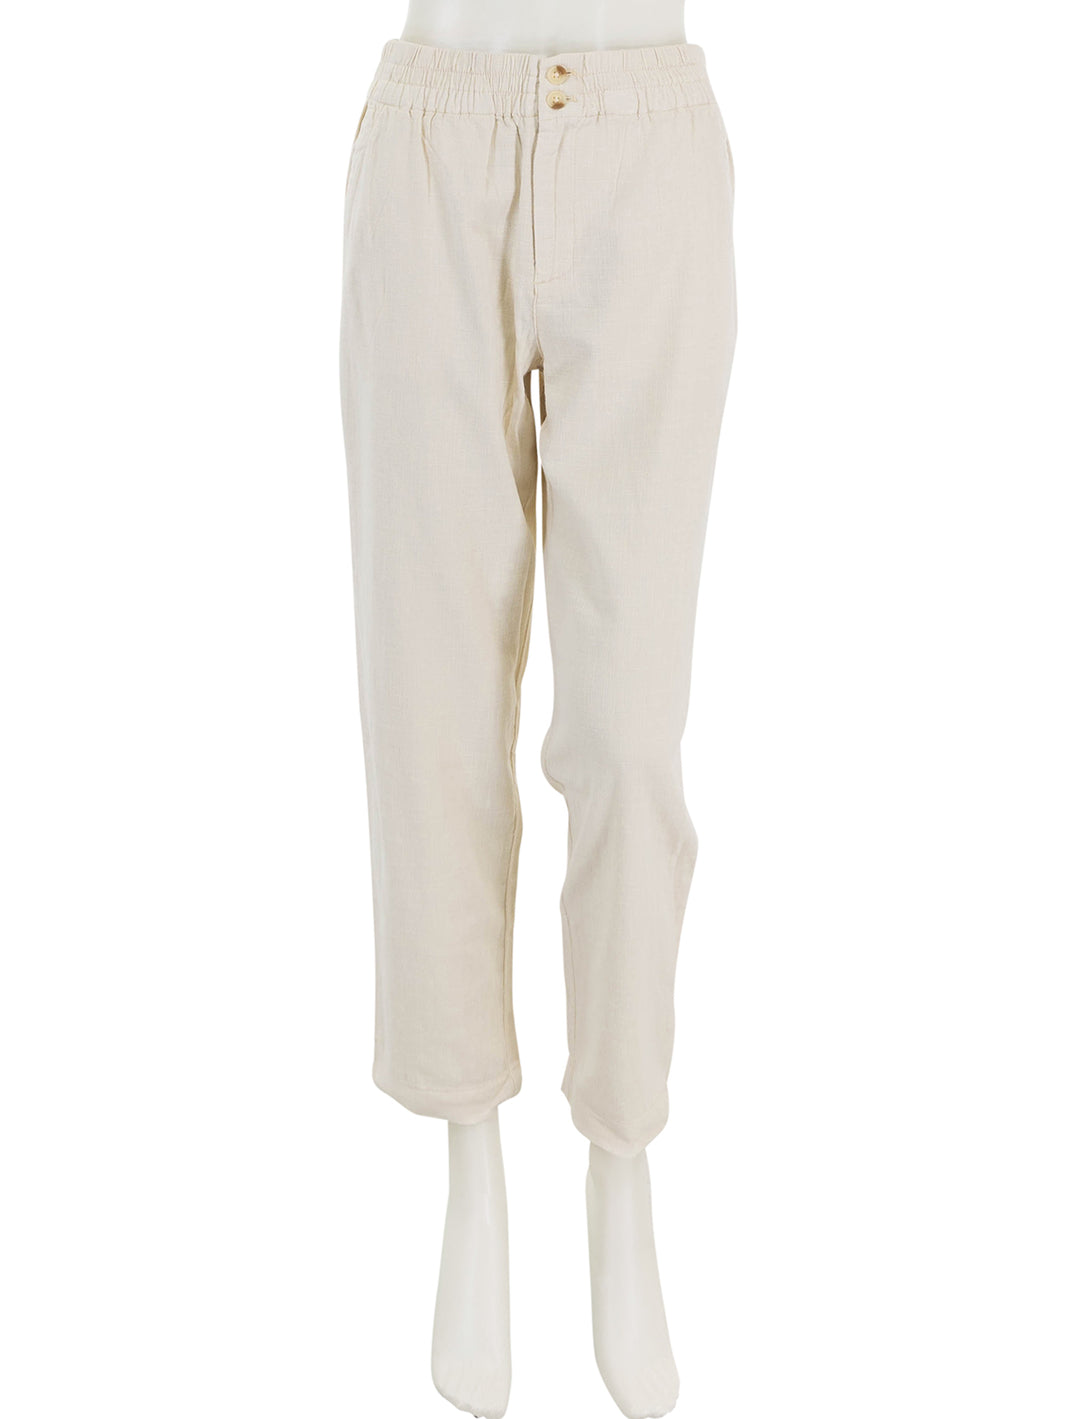 Front view of Marine Layer's elle pant in fog.